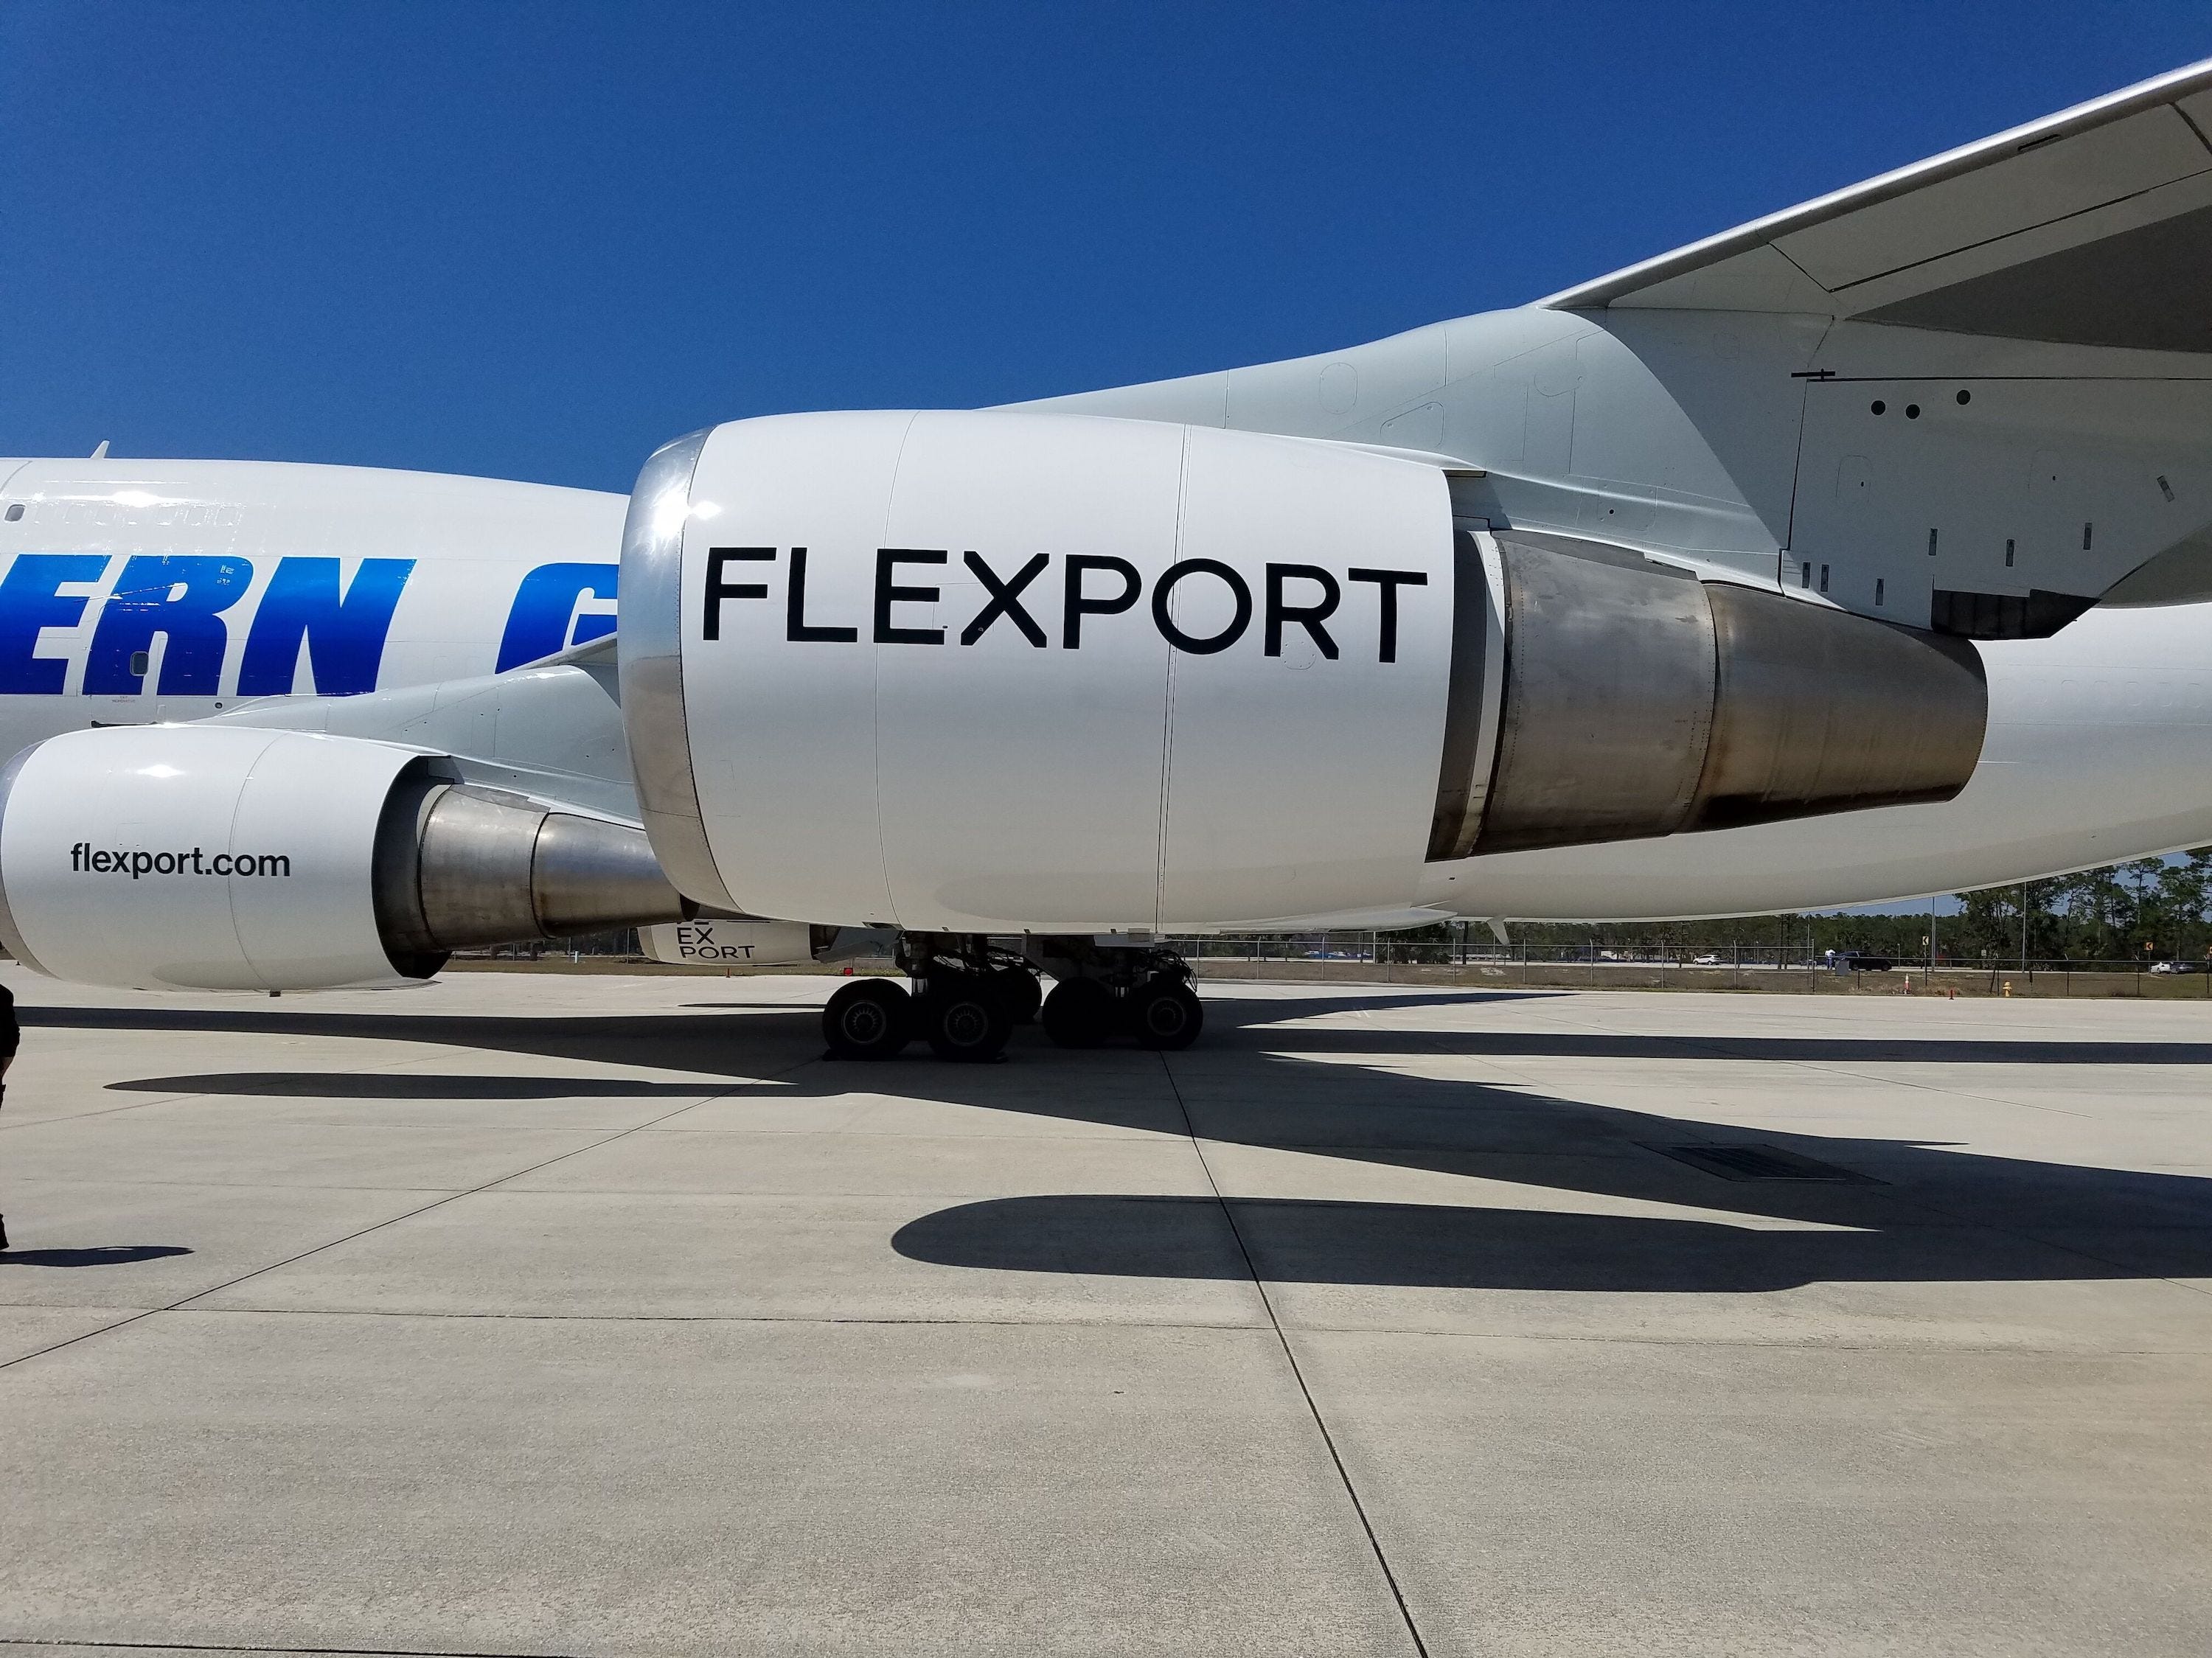 <p>The logistics company will be laying off up to 30% of its workforce toward the end of the October. The pending layoffs follow a series of <a href="https://www.businessinsider.com/flexport-job-cuts-ceo-resignation-dave-clark-2023-9">cost-cutting measures that Flexport</a> has made since Ryan Petersen returned as CEO last month, <a href="https://www.businessinsider.com/dave-clark-removes-flexport-from-linkedin-job-history-after-resignation-2023-9">following Dave Clark's departure</a>. <br><br>"Ryan has been very transparent in the need to drive the growth and cost discipline required to return Flexport to profitability," a spokesperson for Flexport told Insider by email. "We will do so in a way that doesn't impact customer service and our ability to help grow our customers' businesses. We won't be commenting on specific details with regard to employee reductions."</p><p>This is the second round of cuts for Flexport this year. The company <a href="https://www.businessinsider.com/flexport-lays-off-20-percent-workforce-2023-1">laid off about 20% of its workforce</a> in January.  </p>